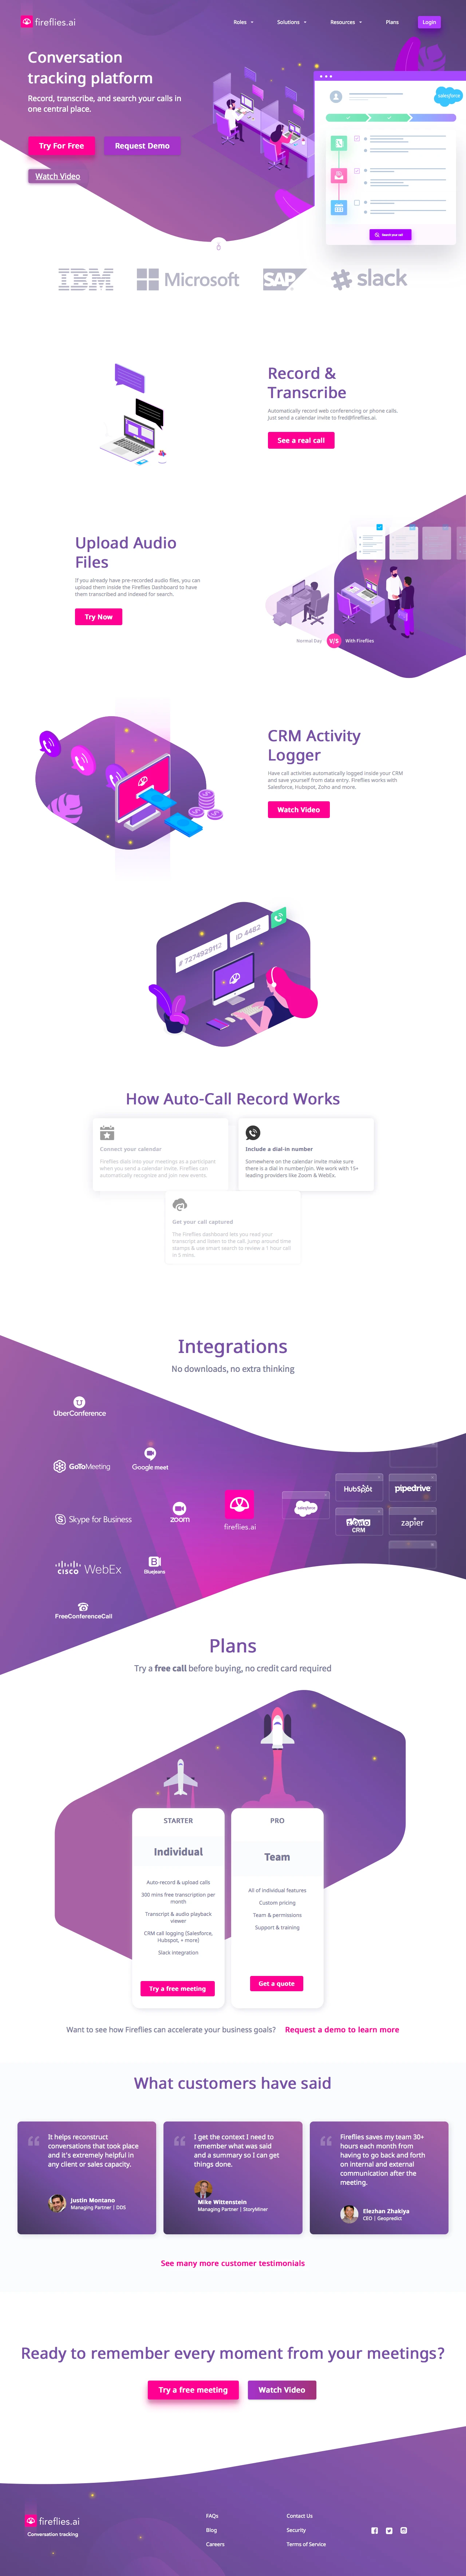 Fireflies.ai Landing Page Example: Record, transcribe, and search your calls in one central place. Fireflies lets you search all your past convos and create action items in seconds. Easiest meeting minutes, ever.